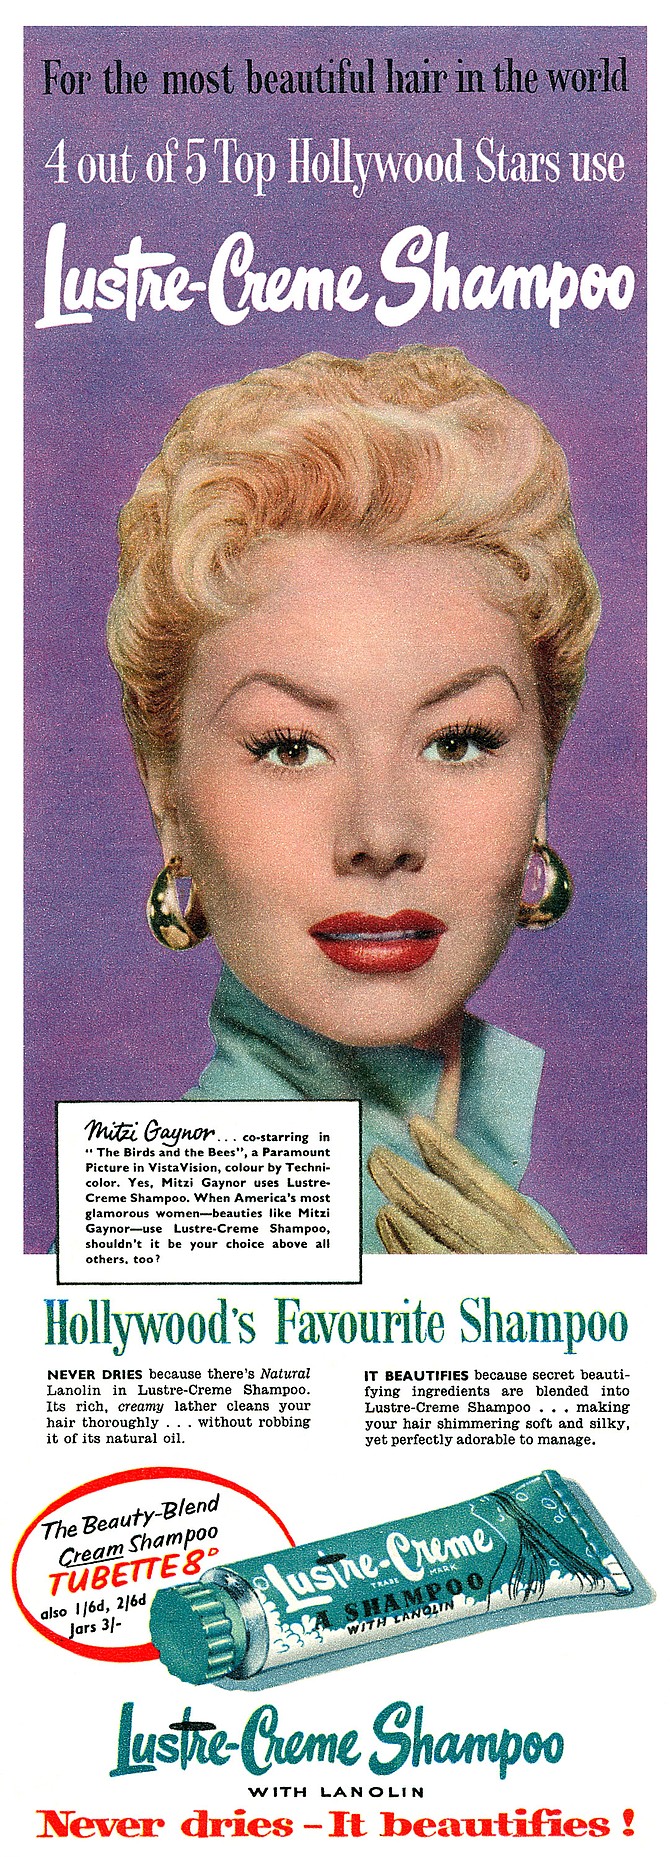 San Diego's own, Mitzi Gaynor, uses Hollywood's favourite shampoo, Lustre-Creme with Lanolin. Shouldn't you? 1956.